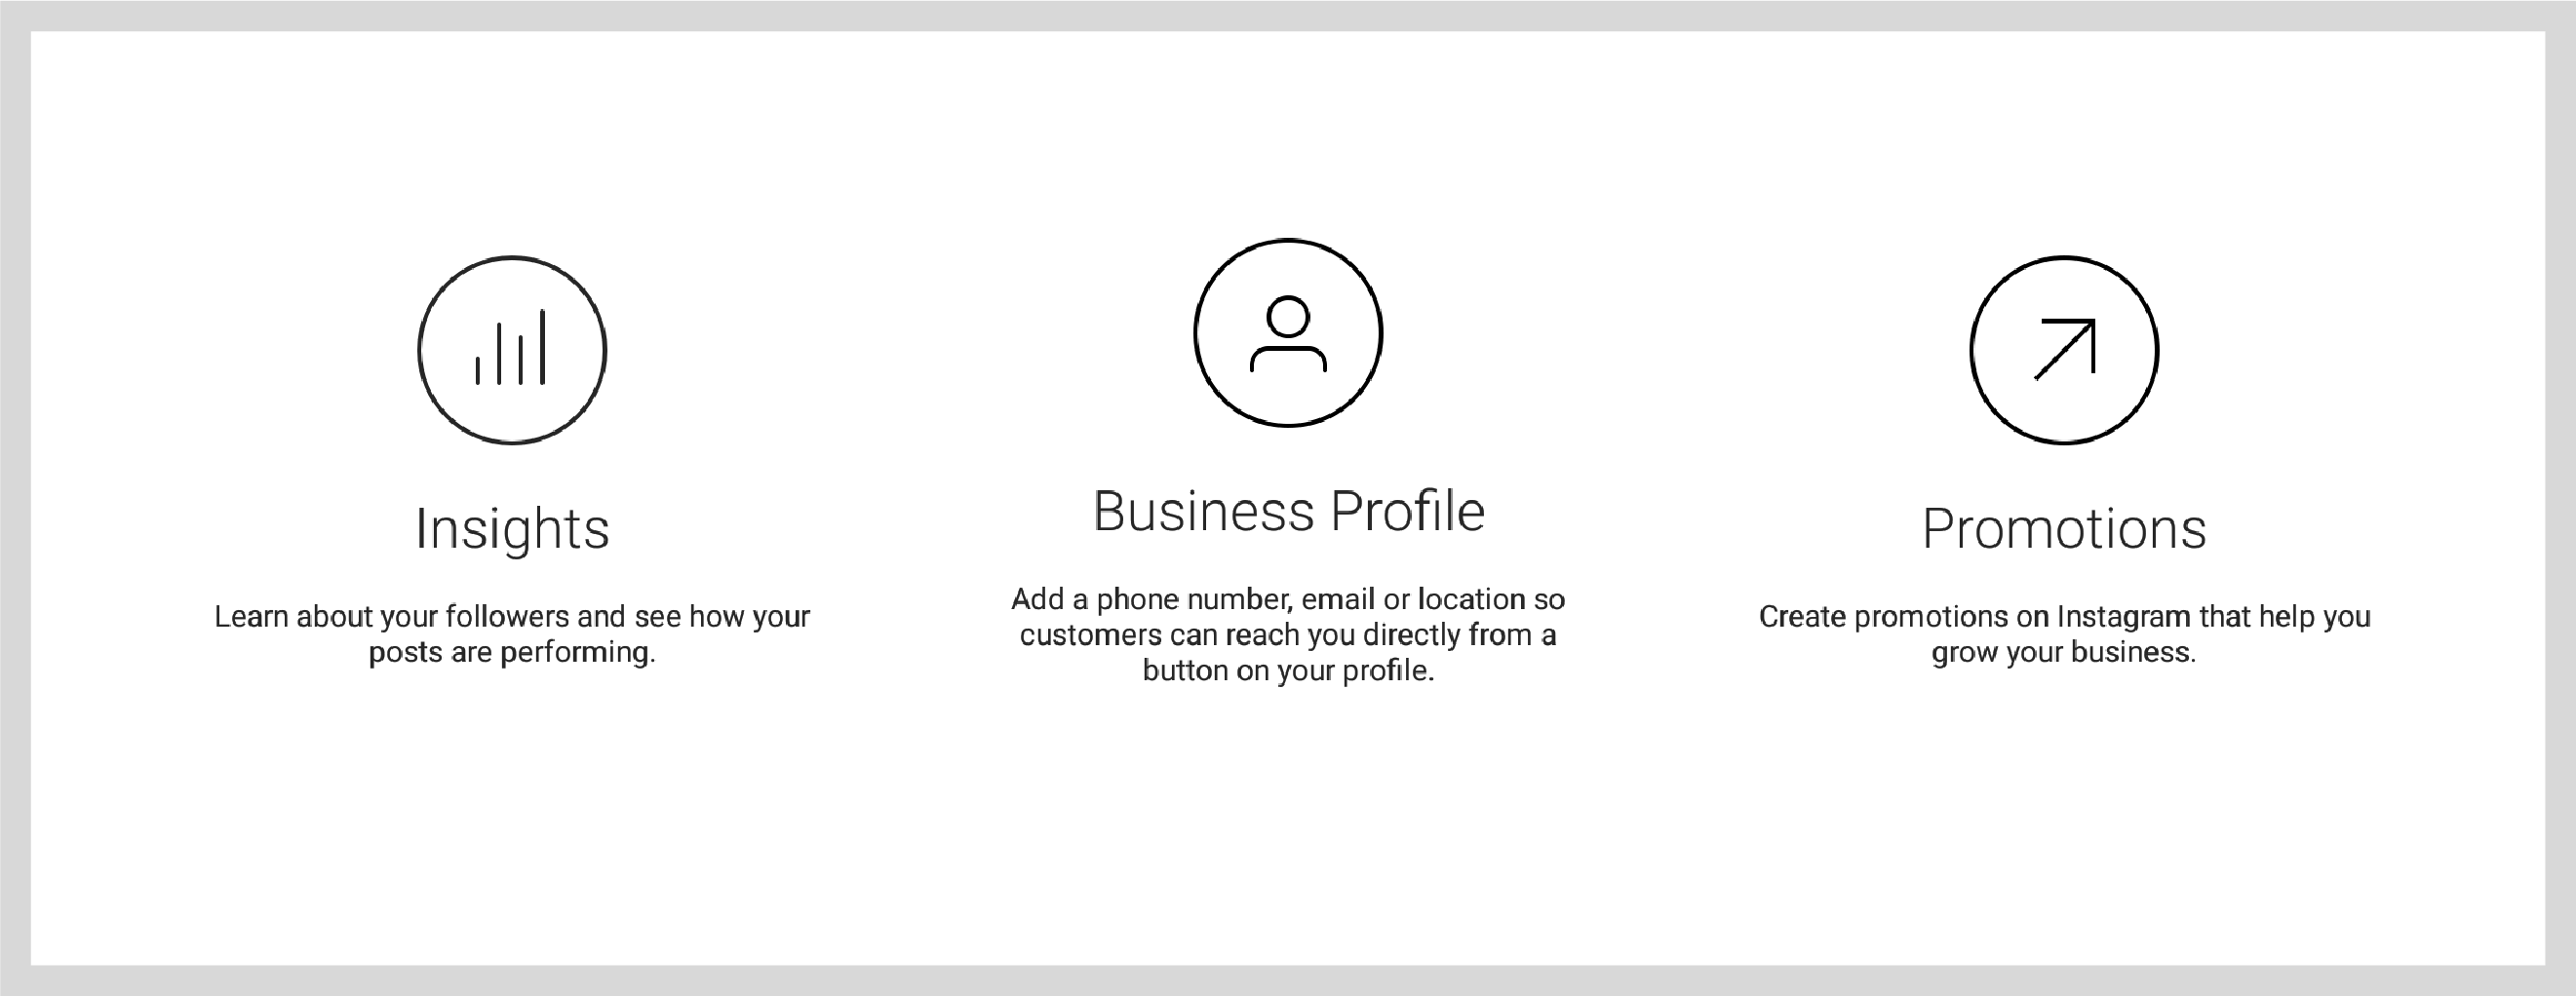 Instagram Business Profile Best Ways to Use Instagram For Business